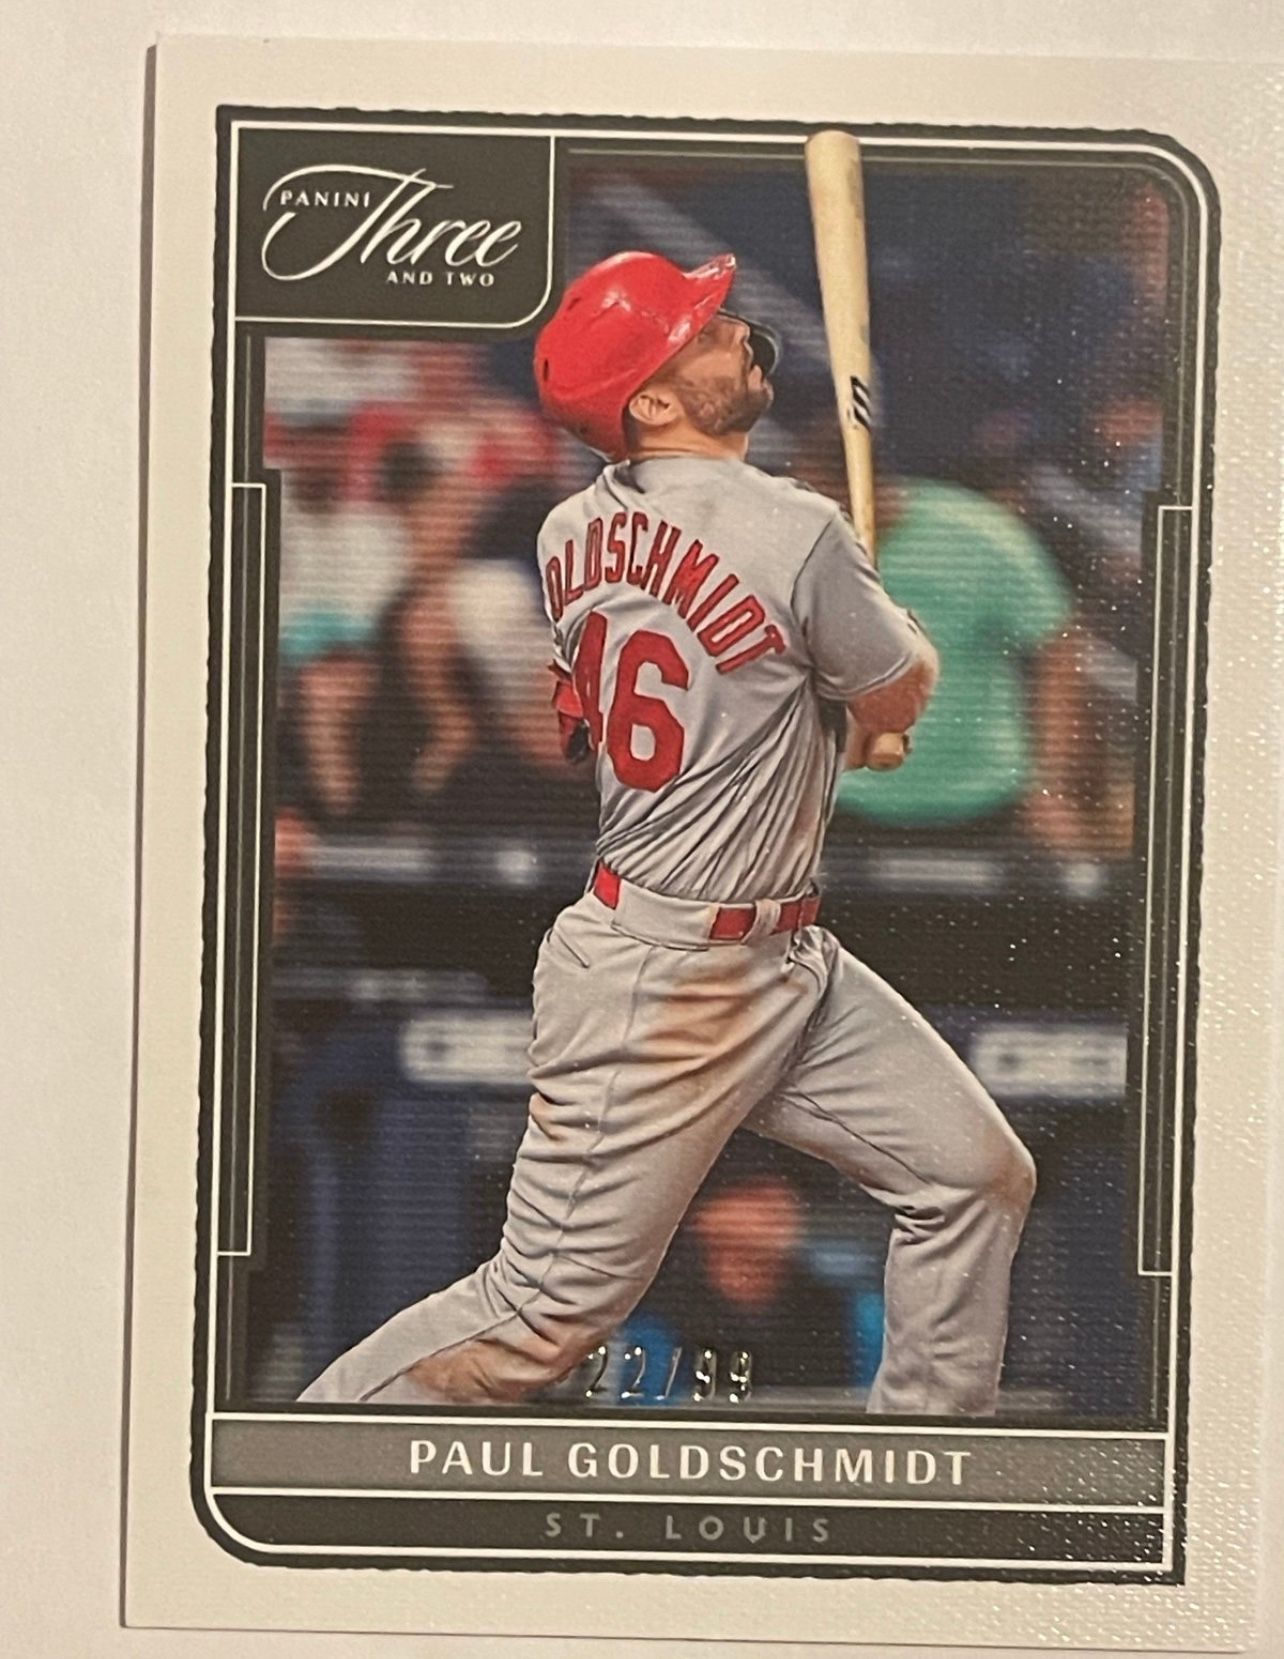 2022 Panini Three and Two Paul Goldschmidt /99